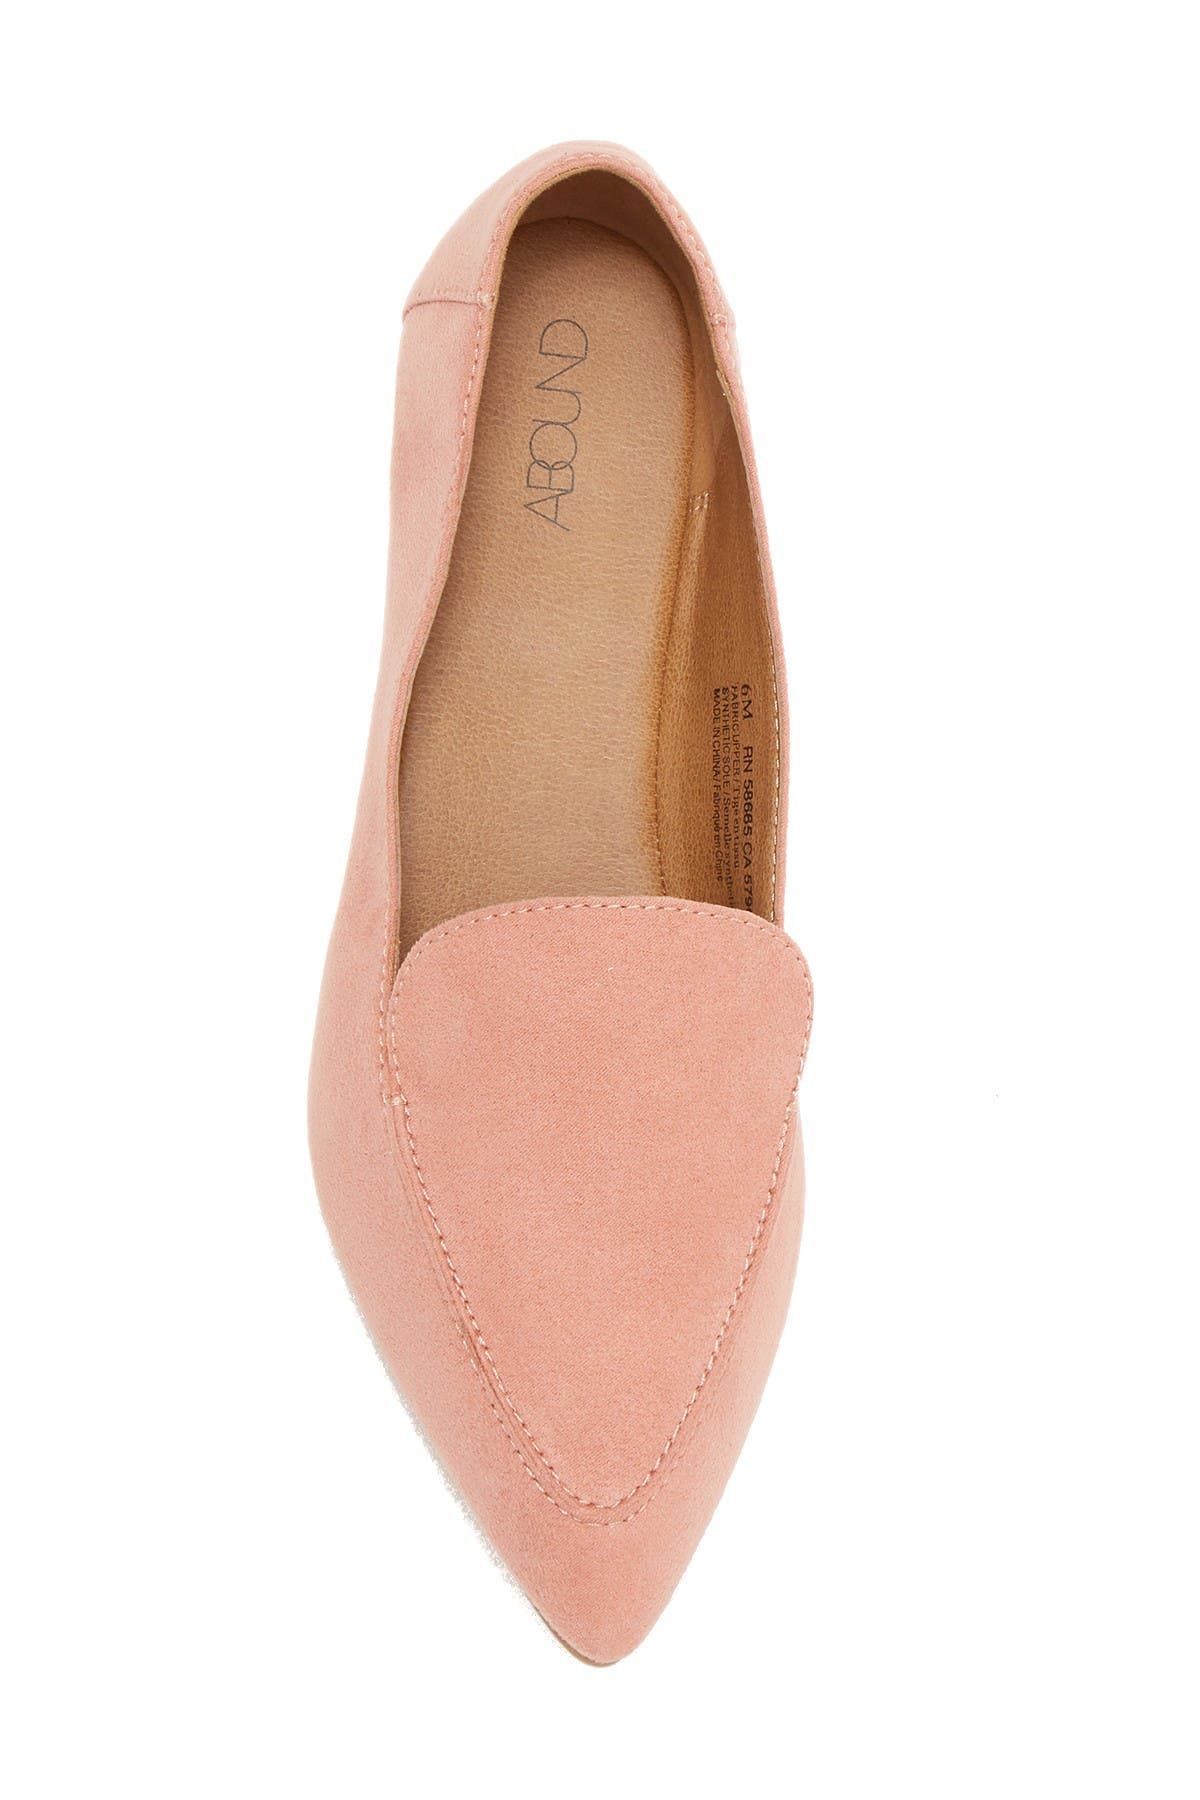 abound kali pointed toe flat